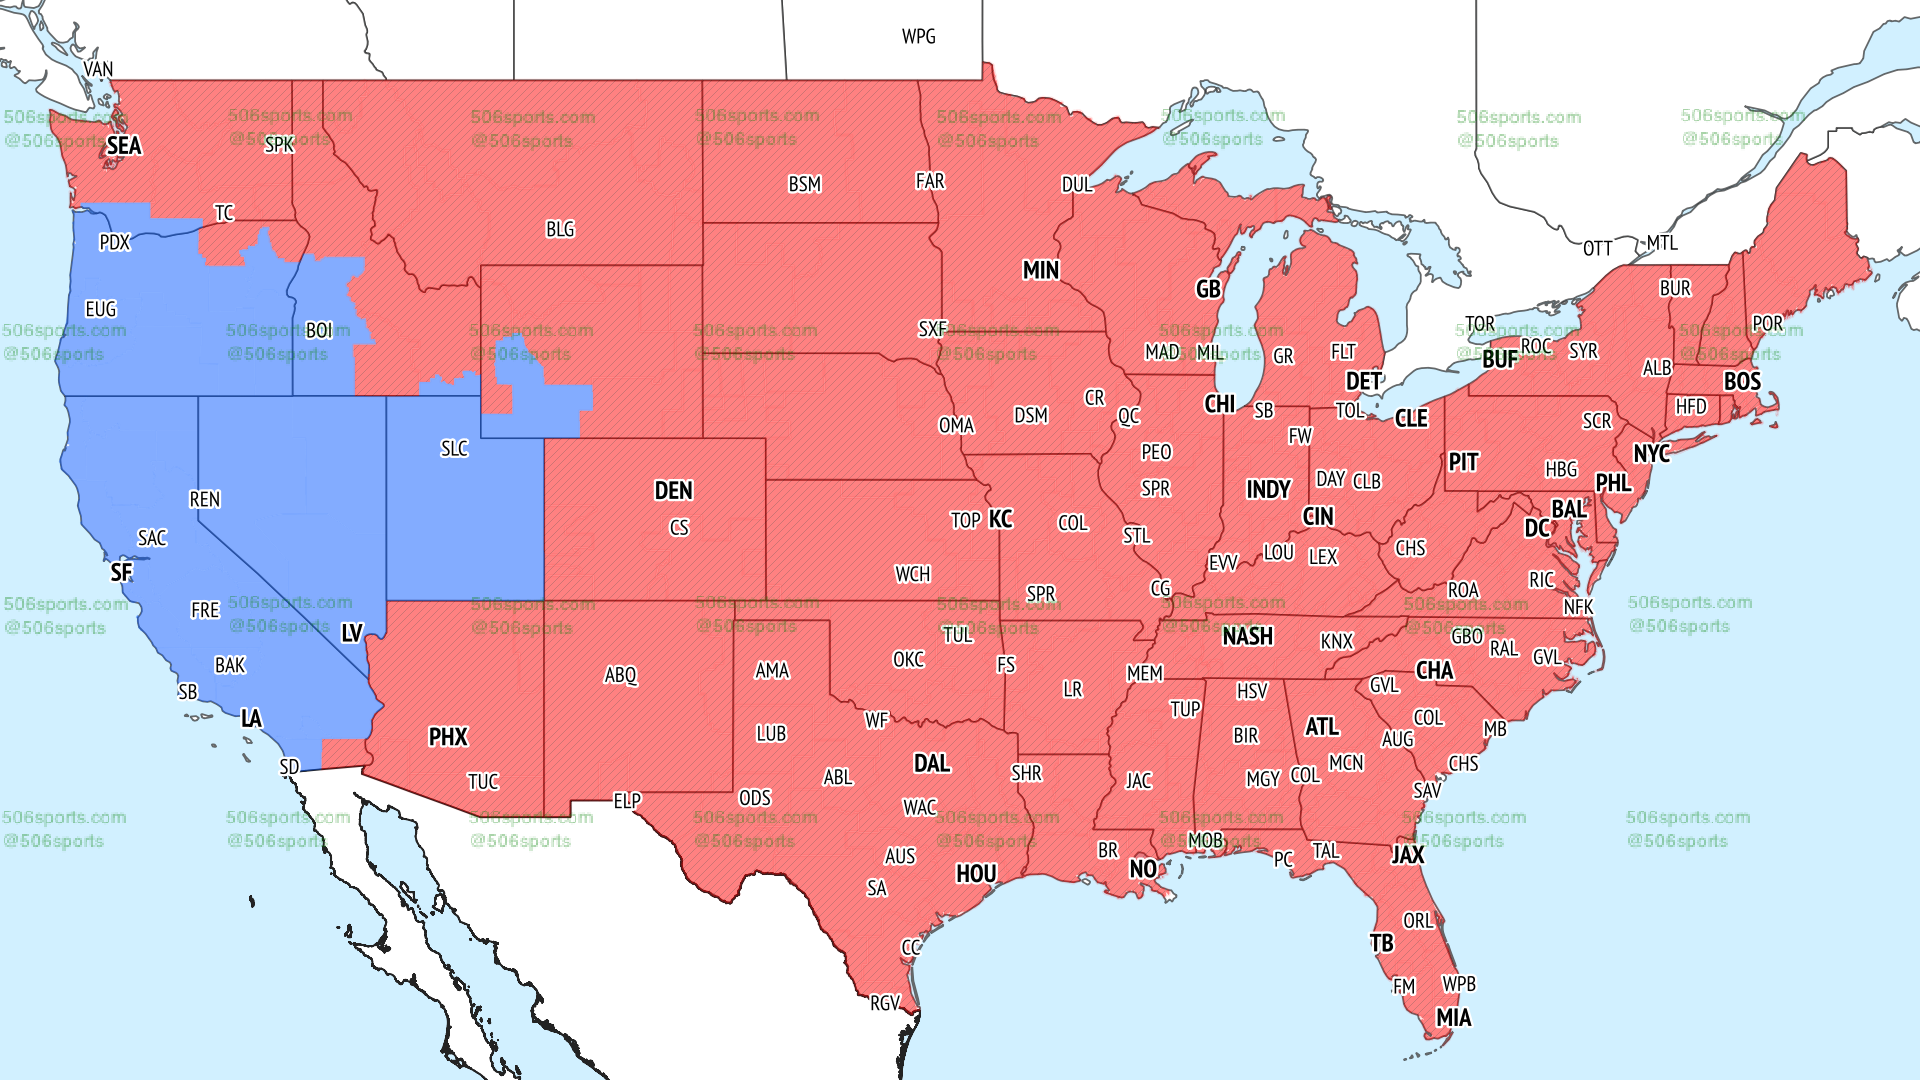 NFL coverage map of late CBS games in Week 1